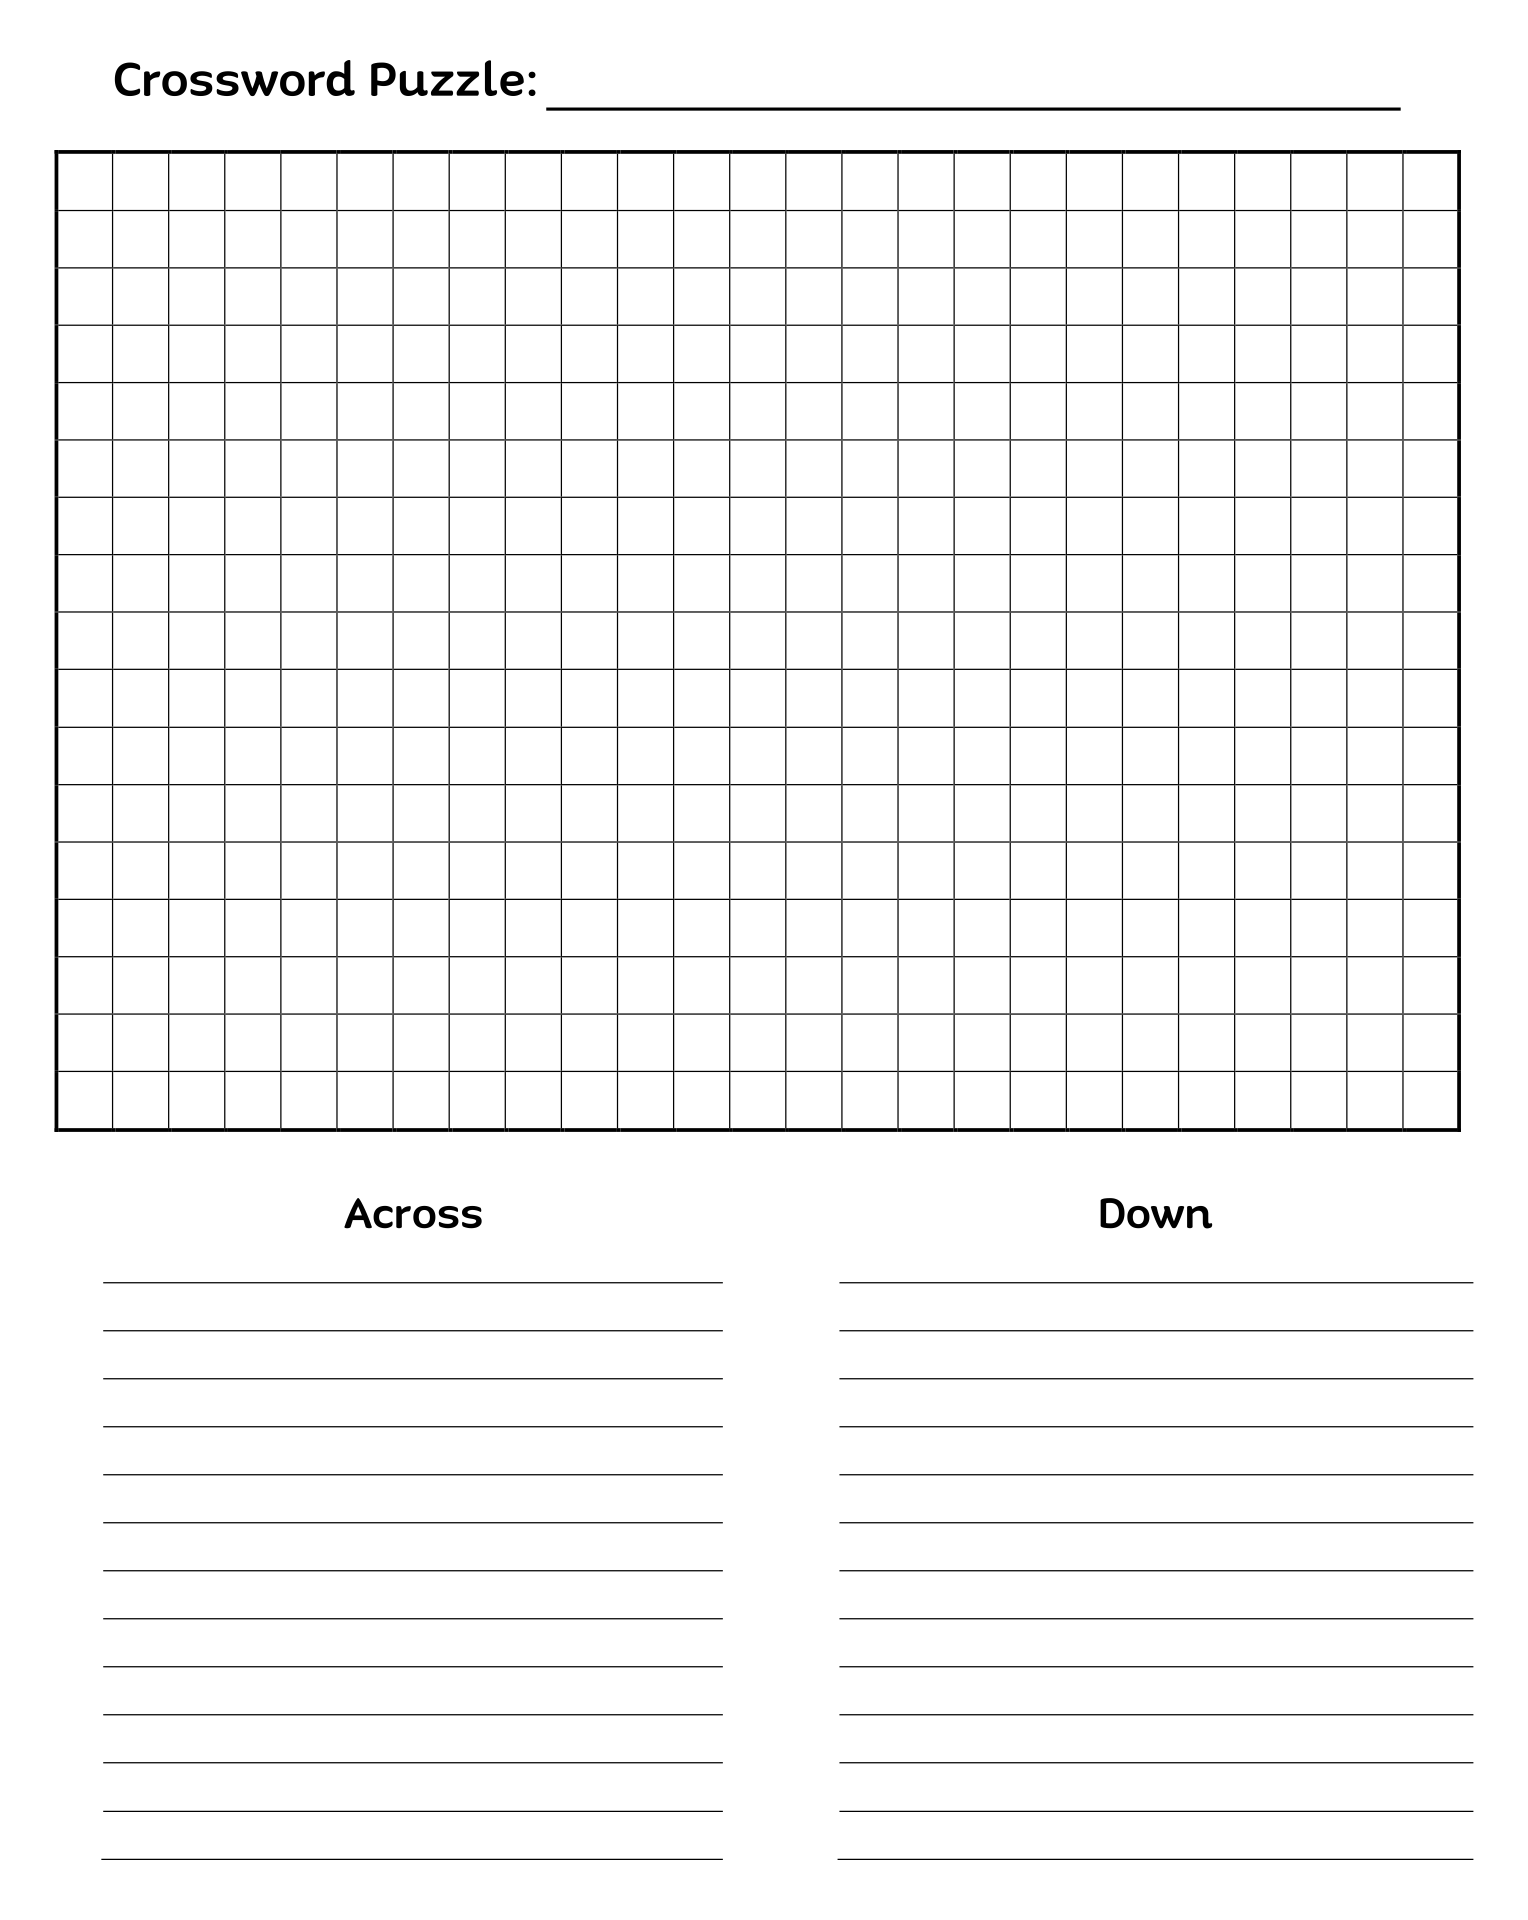 blank-crossword-puzzle-template